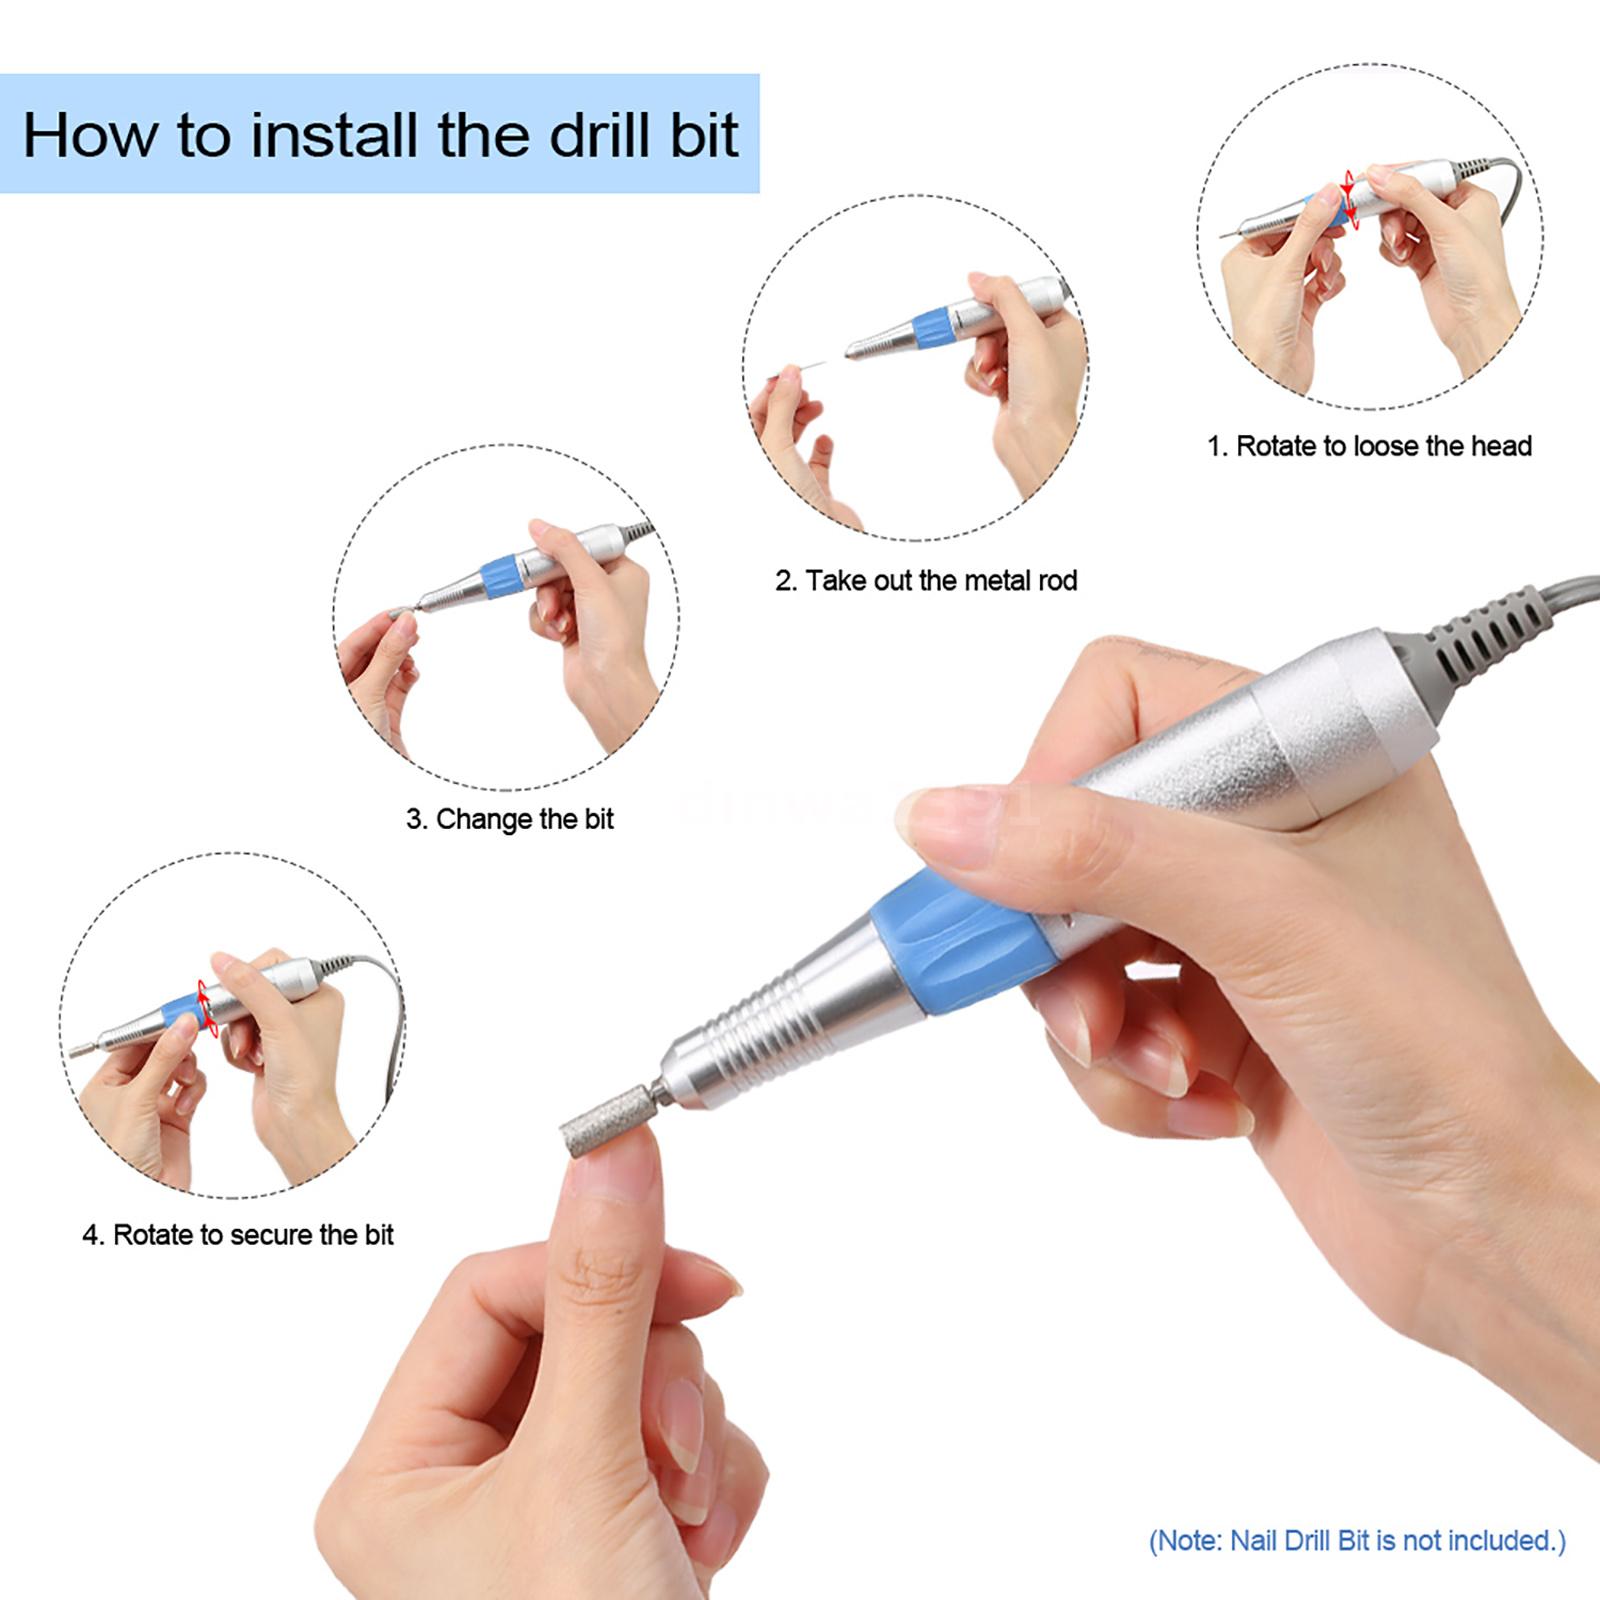 Pro Electric Nail Drill File Replace Handpiece Pen Manicure Pedicure Bit US N2N4 | eBay How To Fix Nail Drill Handpiece